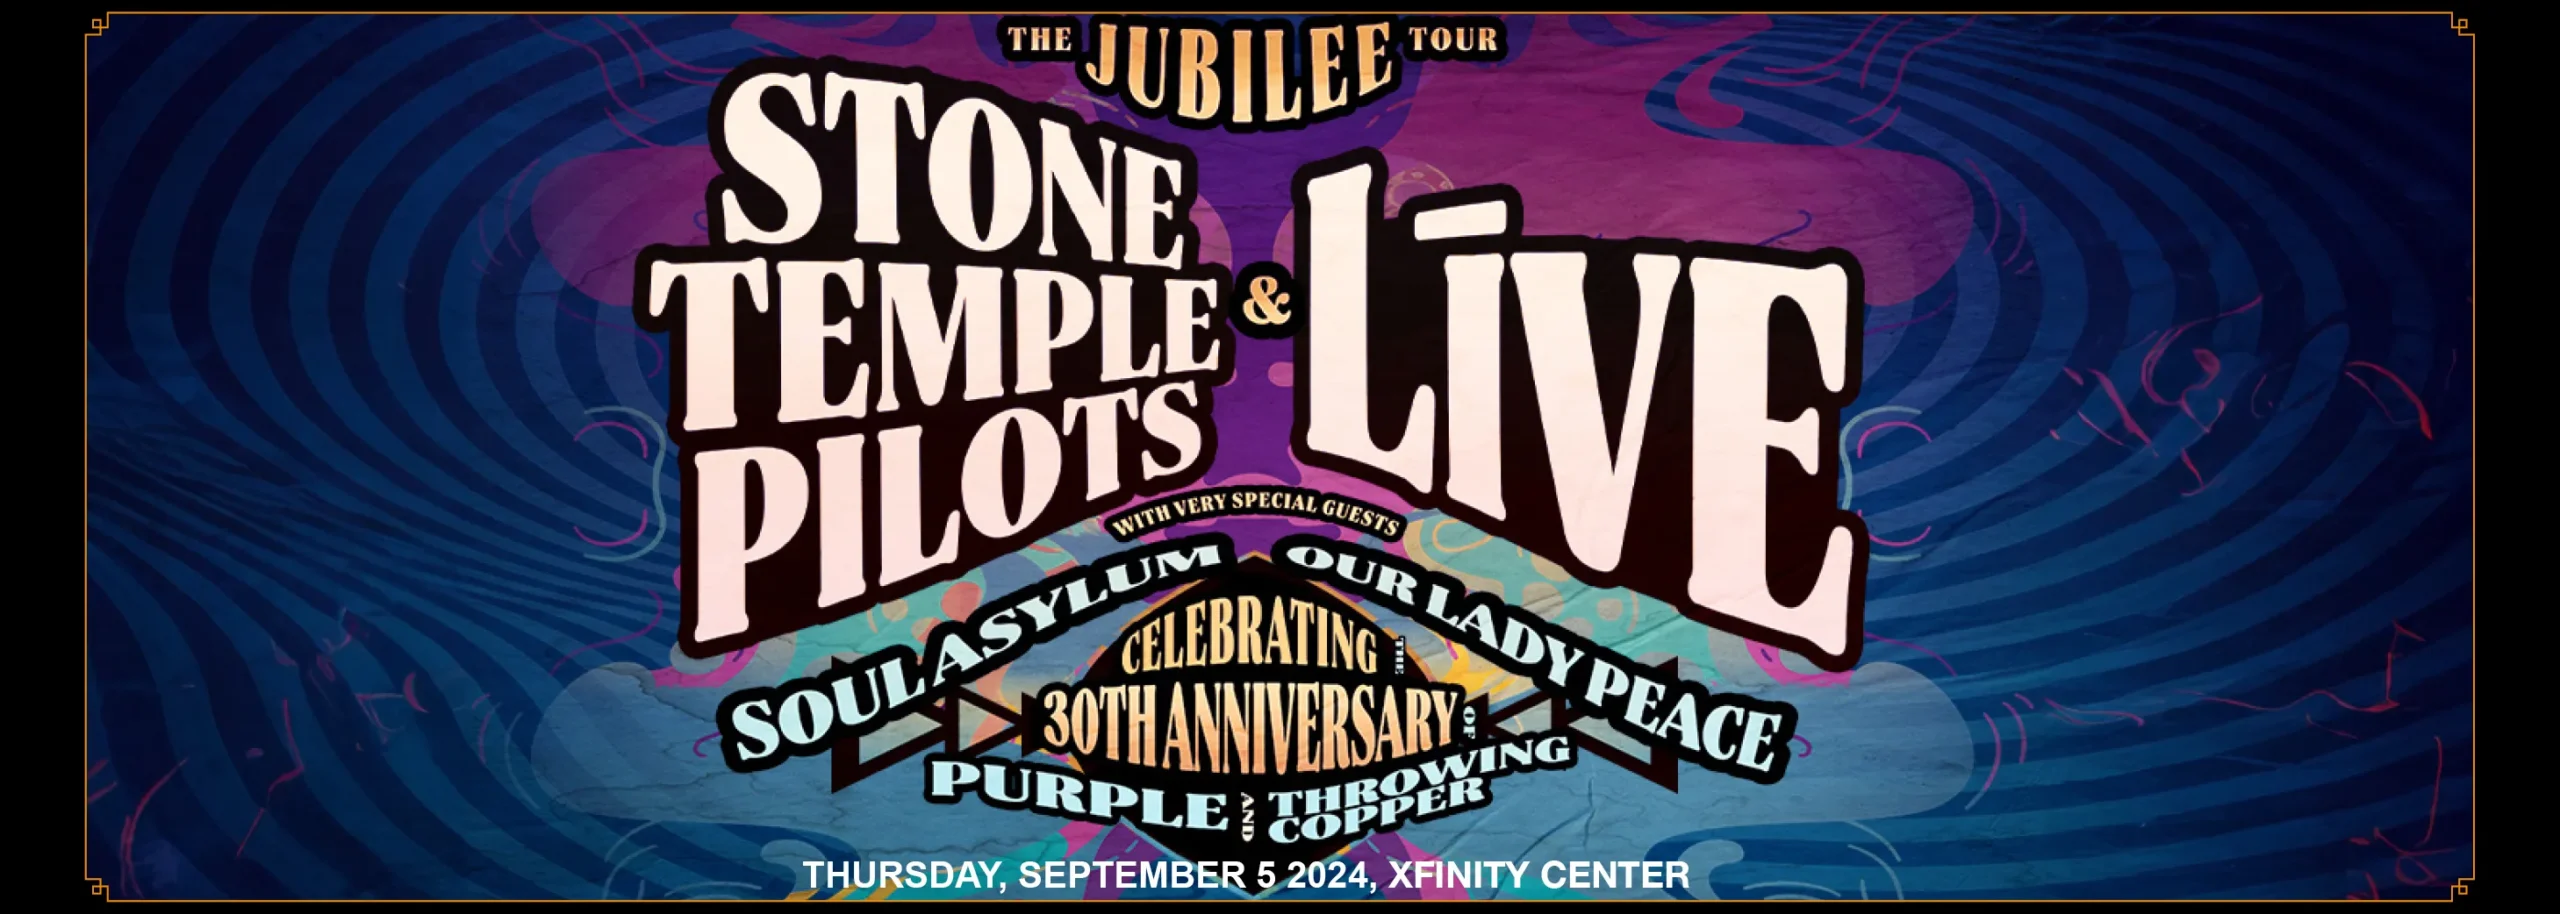 Stone Temple Pilots & Live Tickets 5th September Xfinity Center